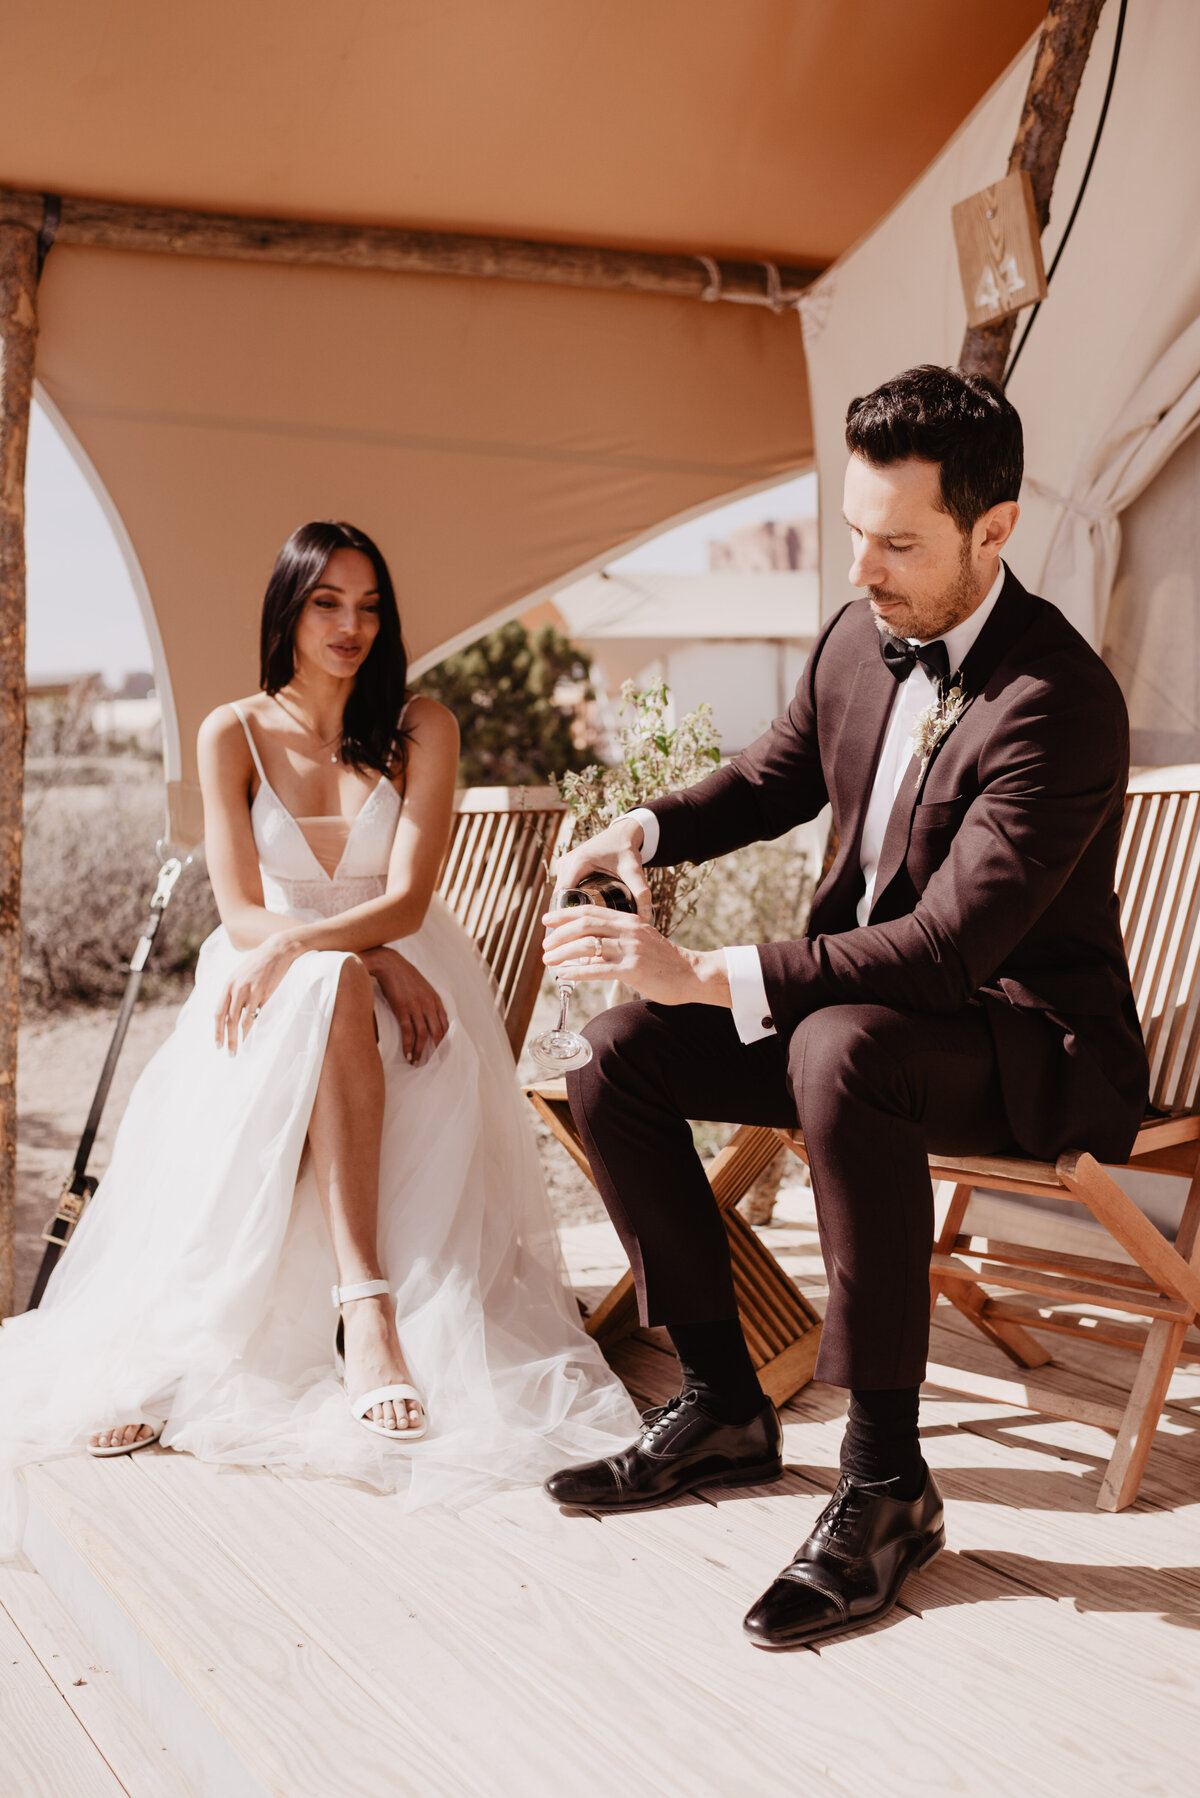 Utah elopement photographer captures groom pouring champagne into glasses